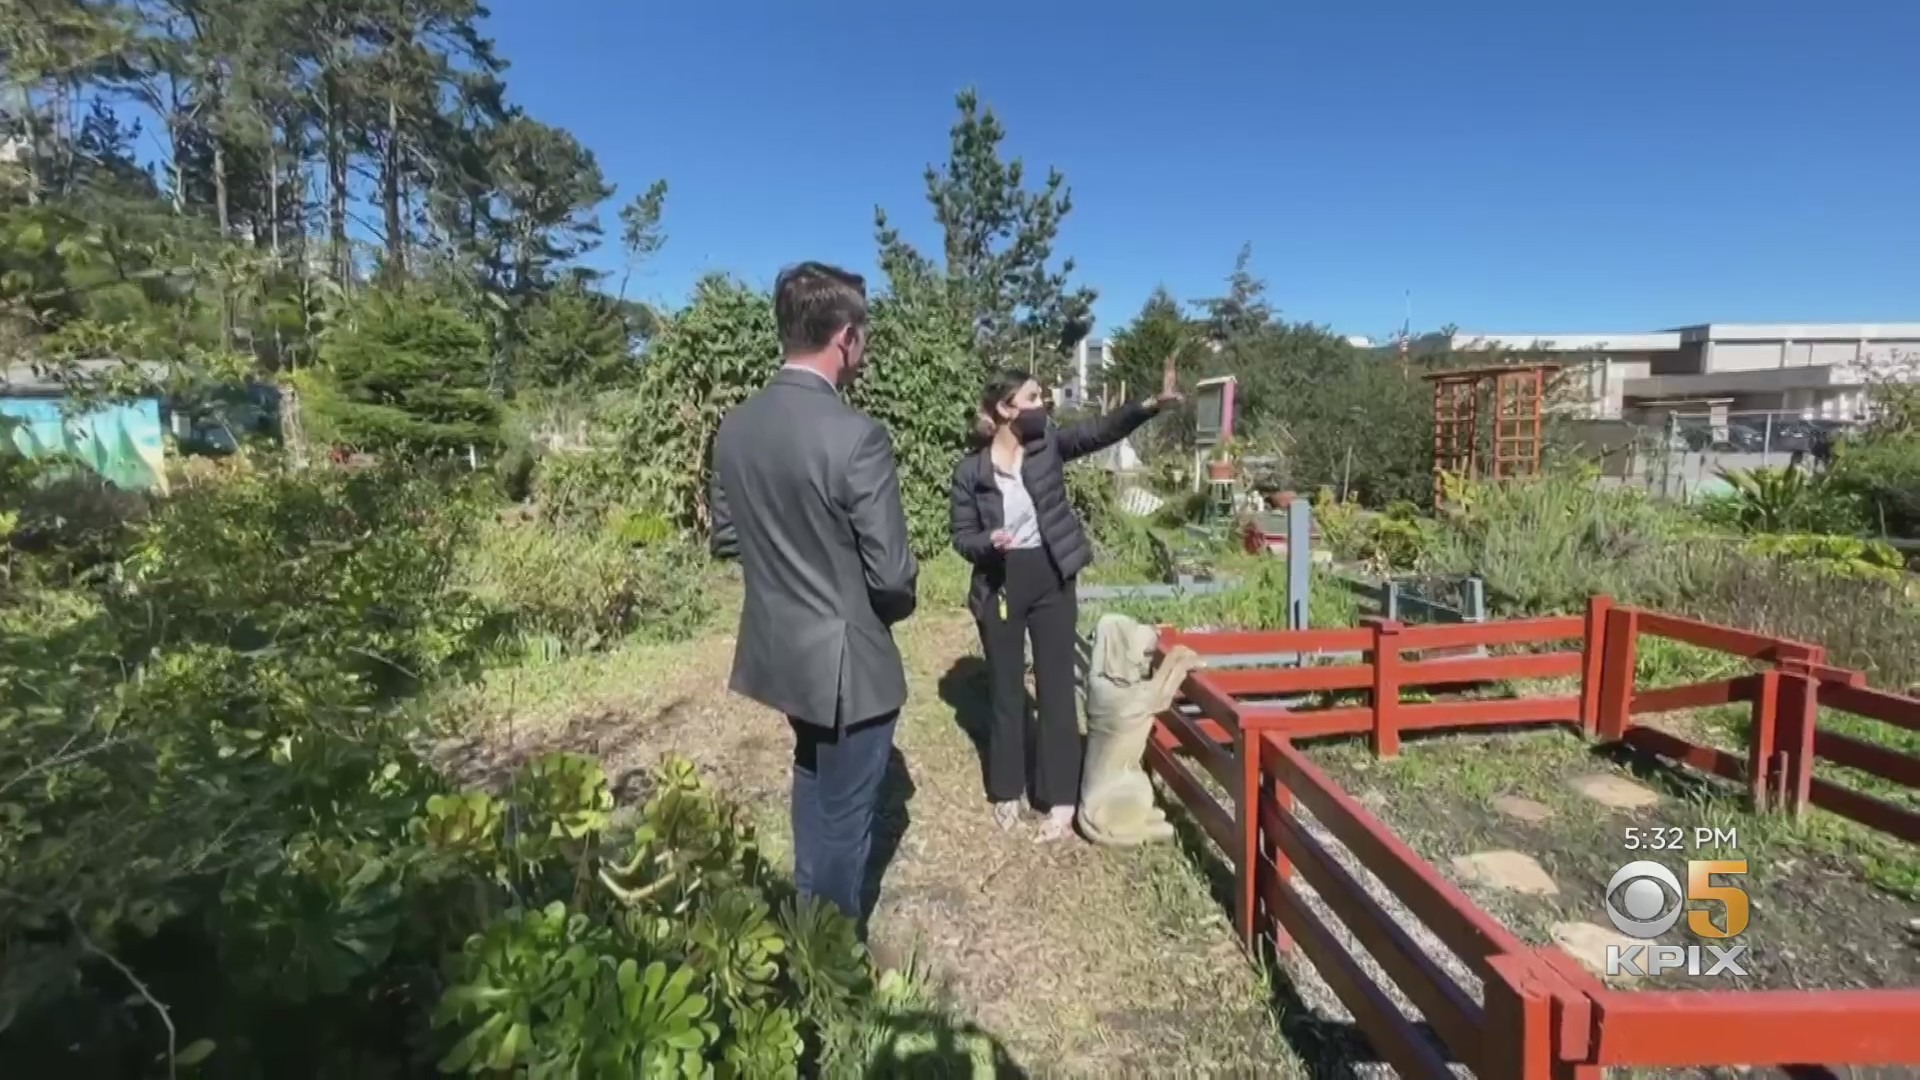 Daly City Housing Development Plans Squeezing Out Beloved Community Garden